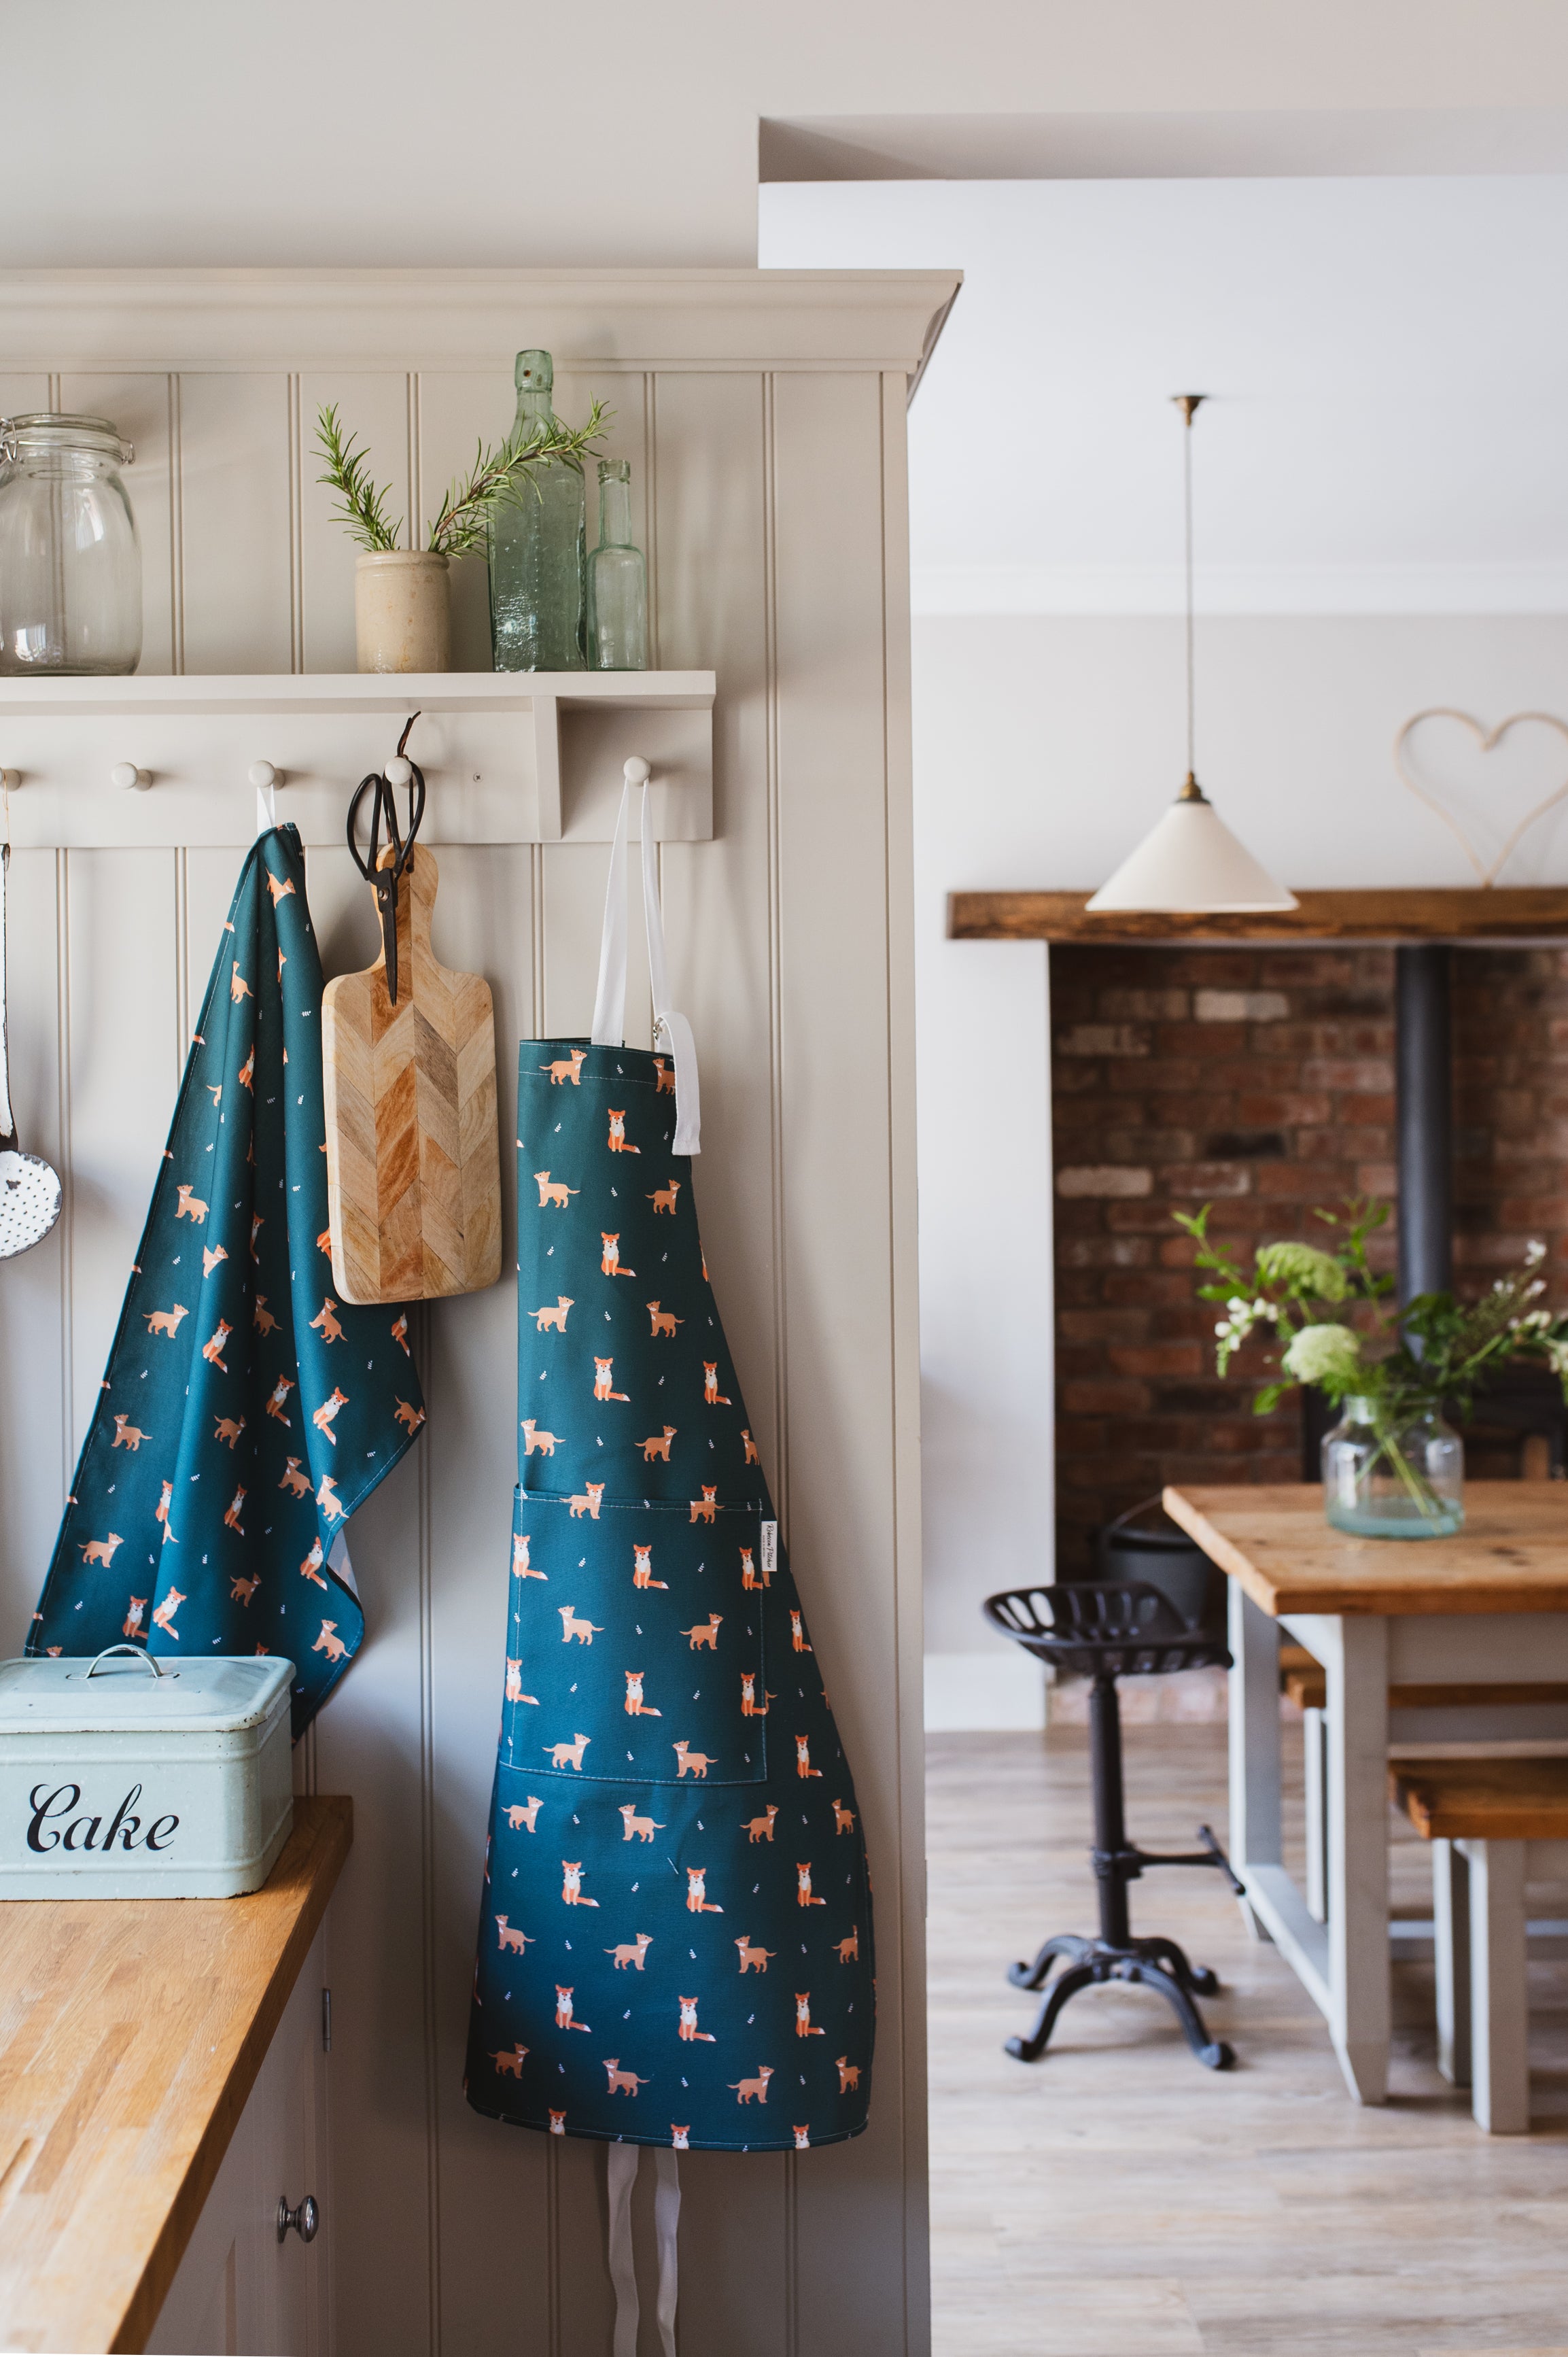 Green Fox apron and tea towel in a country kitchen